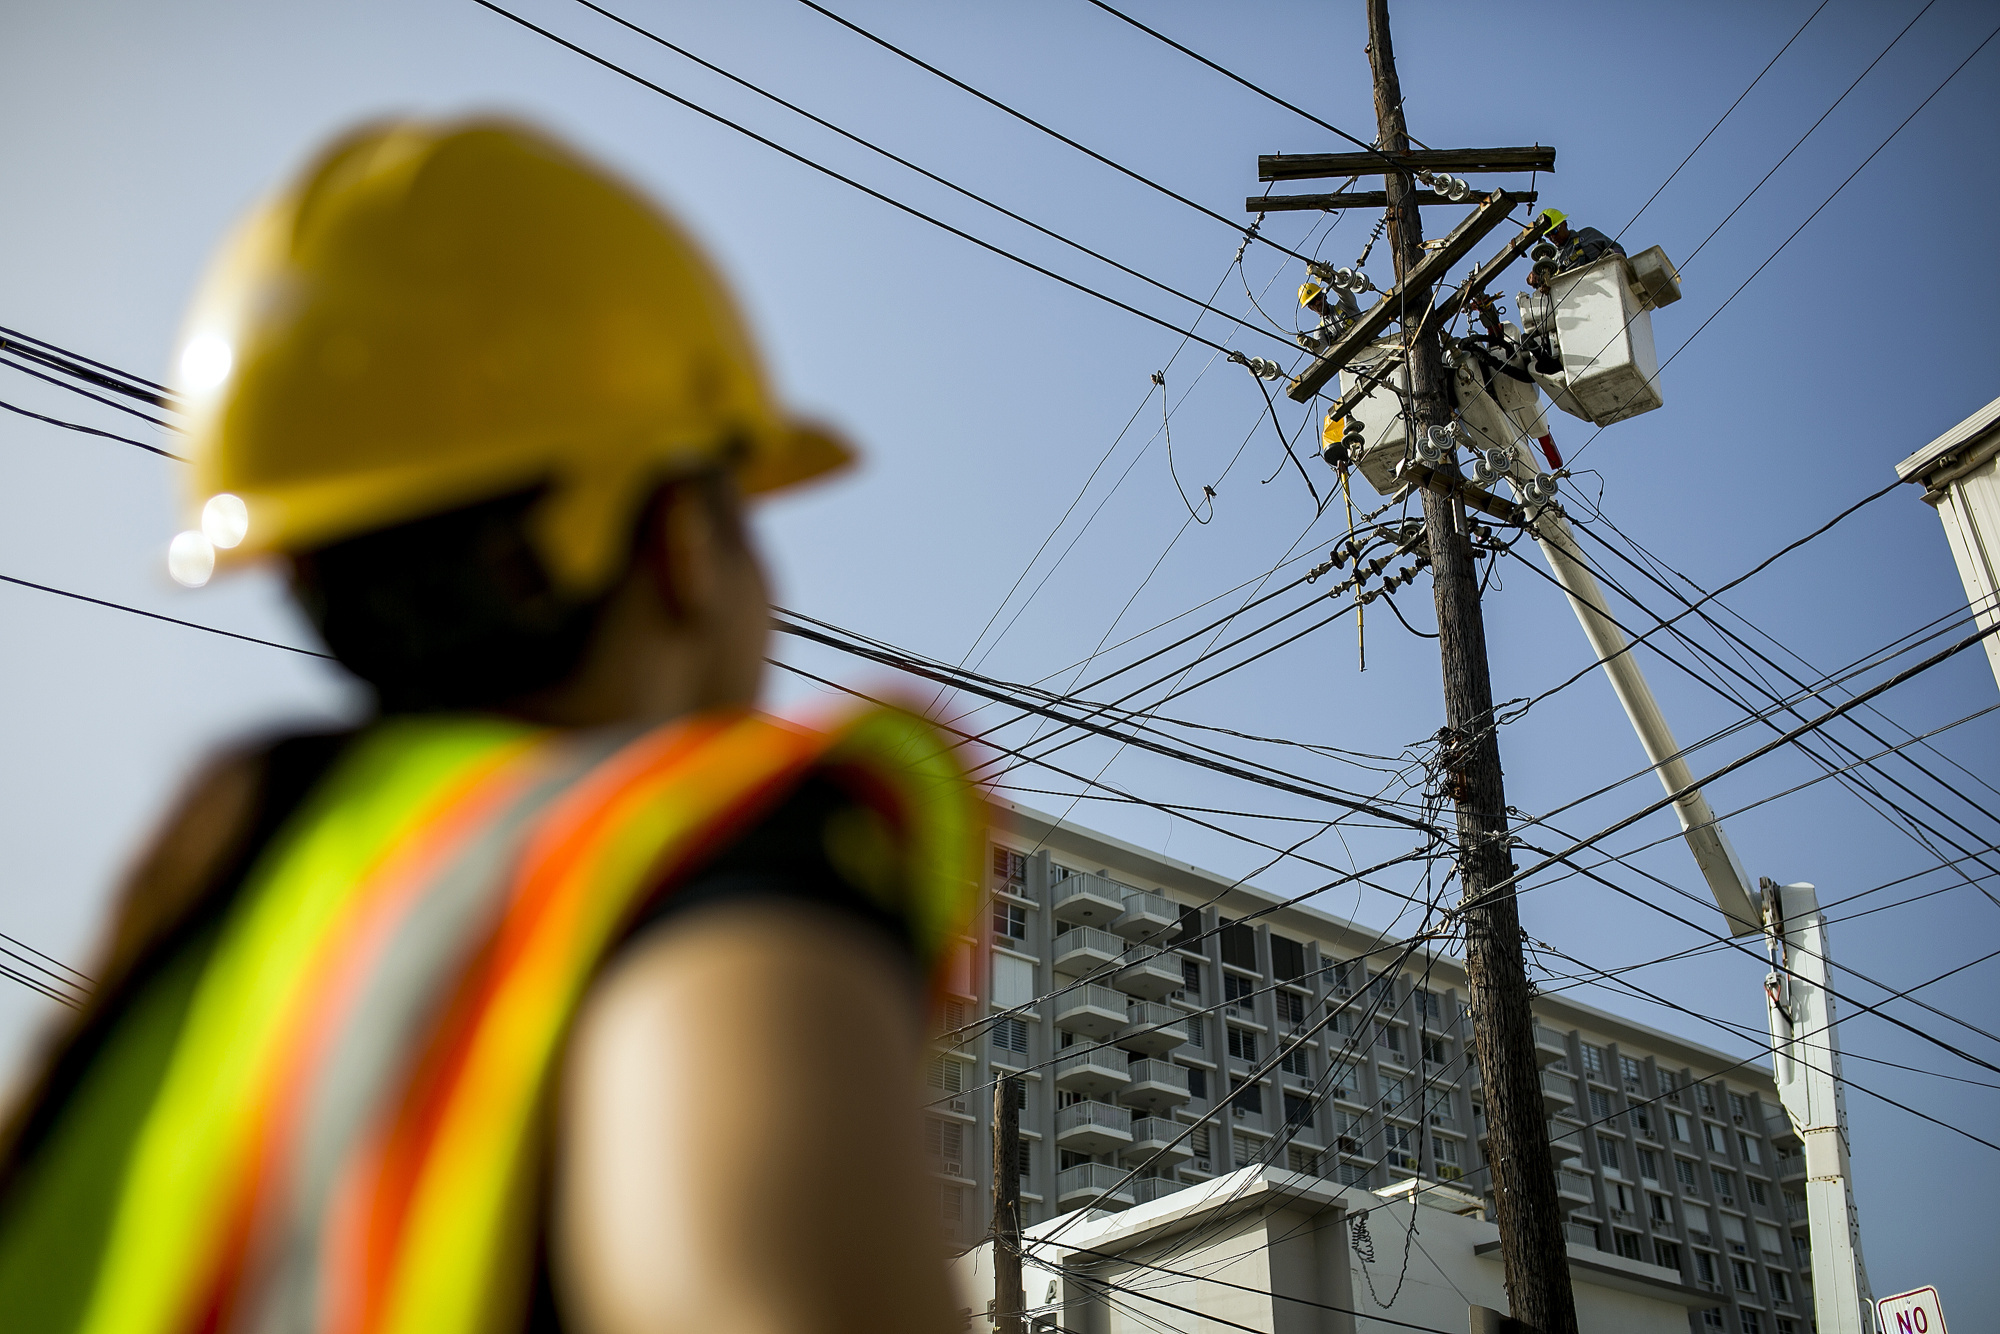 Puerto Rico Electric Power Authority (PREPA) employees fix power lines in Santurce, San Juan, Puerto Rico, on Thursday, Oct. 19, 2017. For longer than most can remember, Puerto Ricans have paid some of the highest energy costs in the U.S. to a notoriously unreliable utility that neglected their grid for years and runs fossil-fuel plants that may be damaging their lungs. A month after Hurricane Maria devastated the island, power lines still lay slack along roads, utility poles are snapped clean in half, and most Puerto Ricans remain in the dark. Photographer: Xavier Garcia/Bloomberg